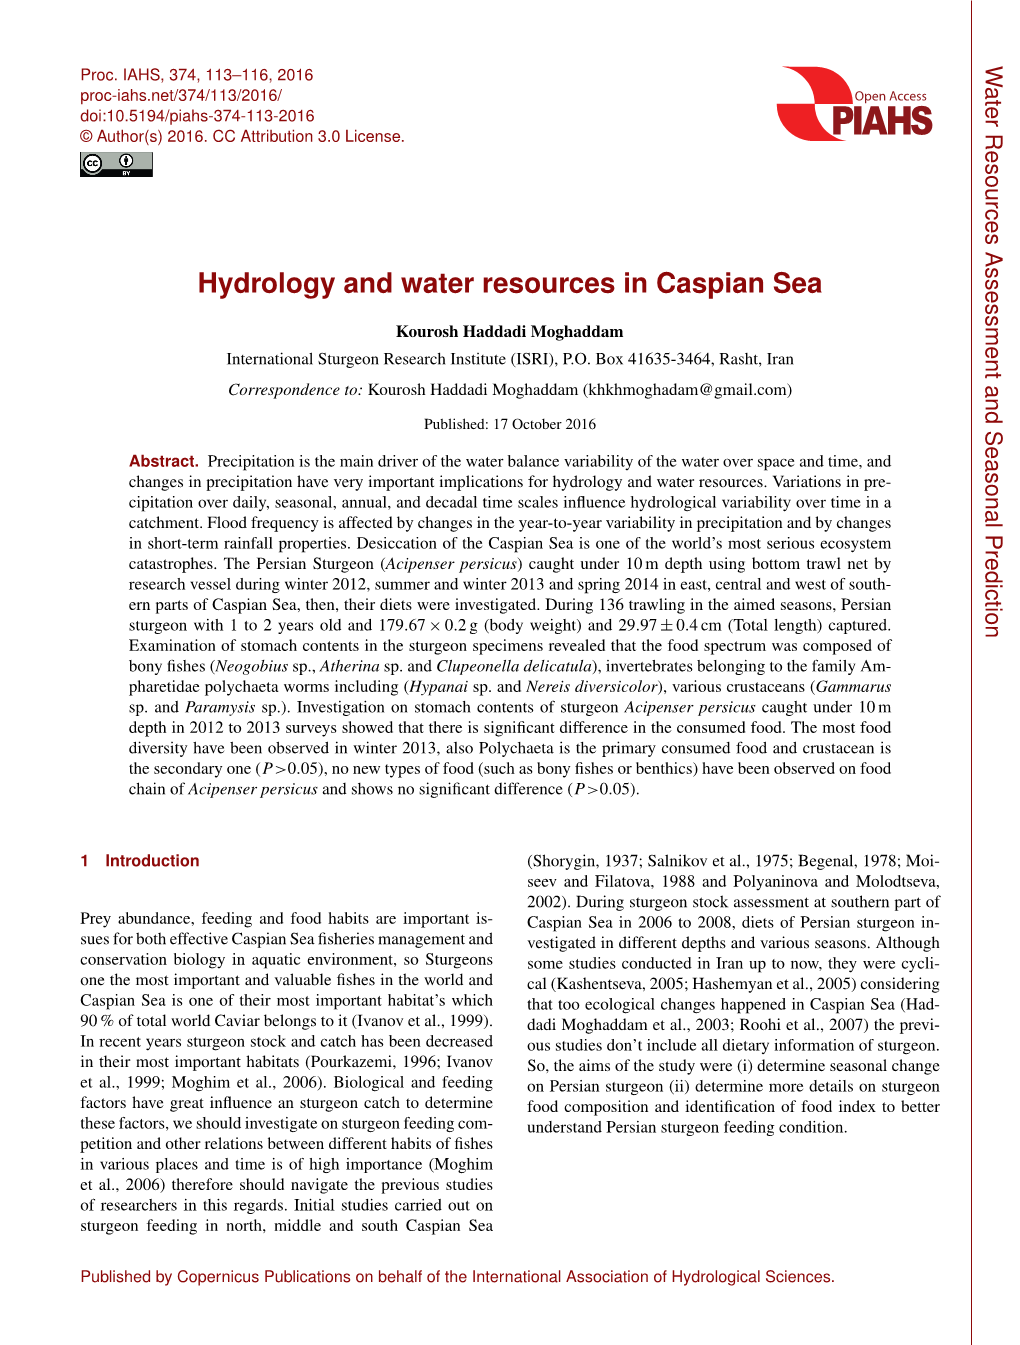 Hydrology and Water Resources in Caspian Sea